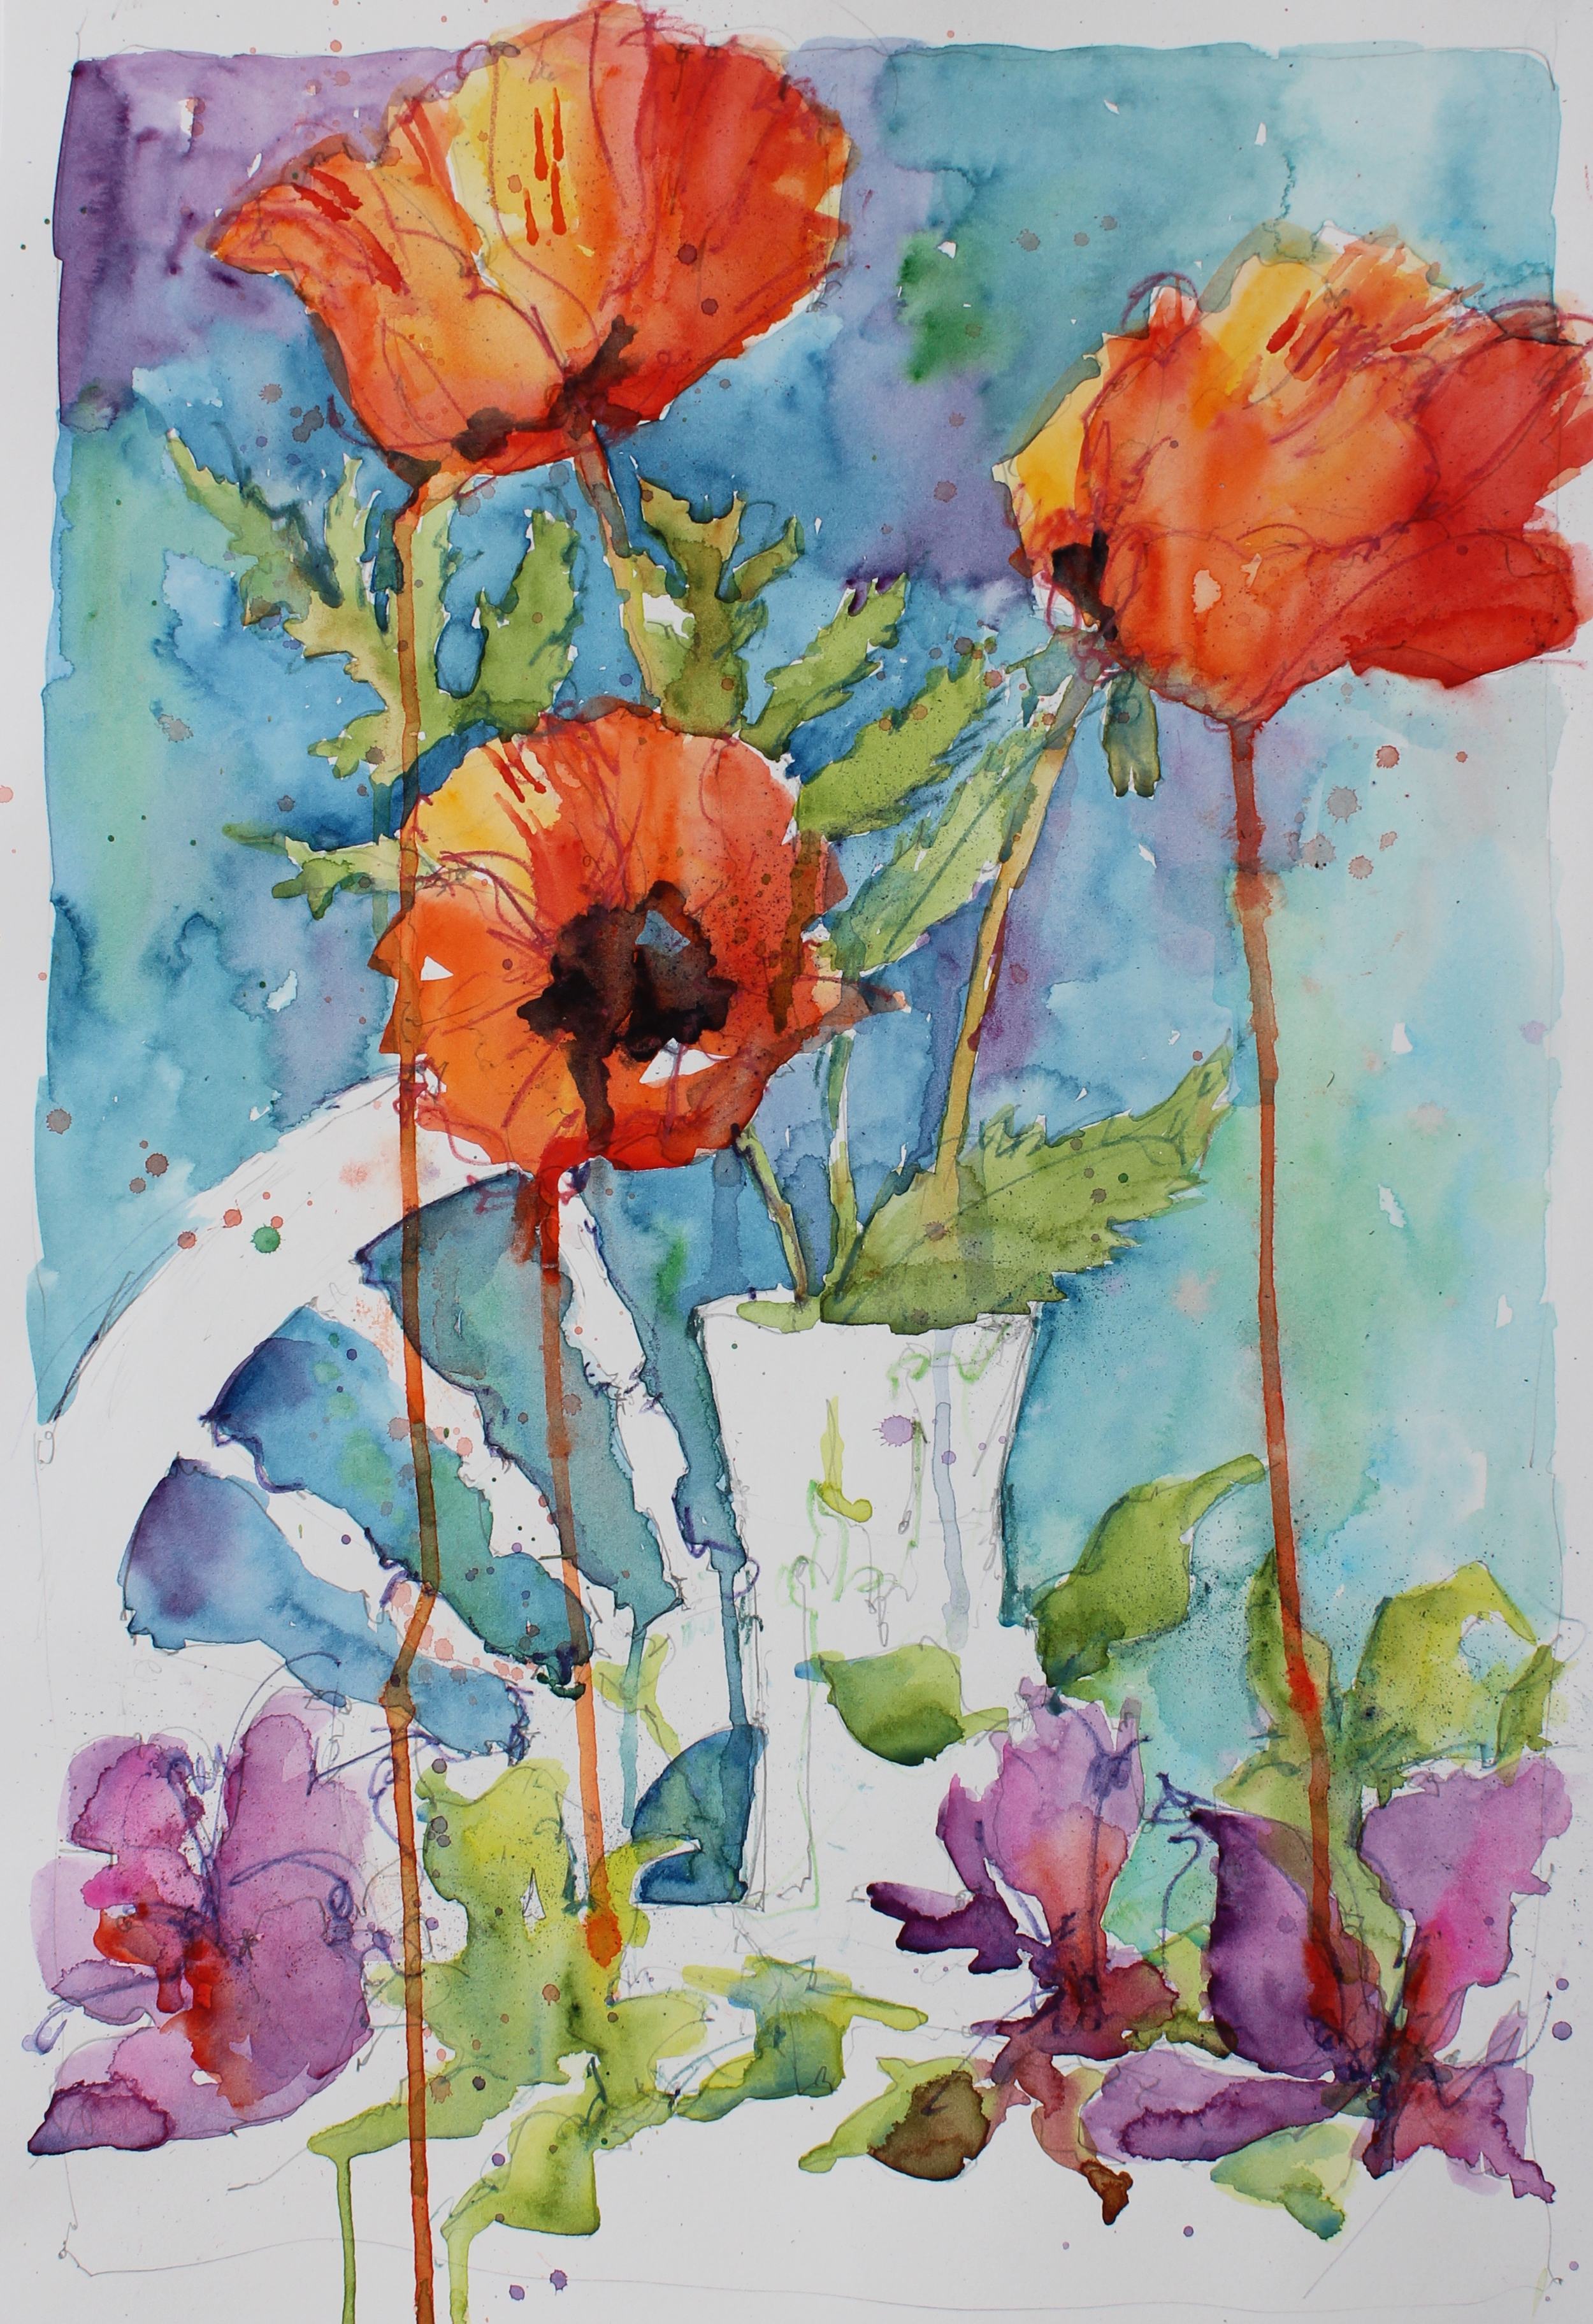 Still Life with Poppies